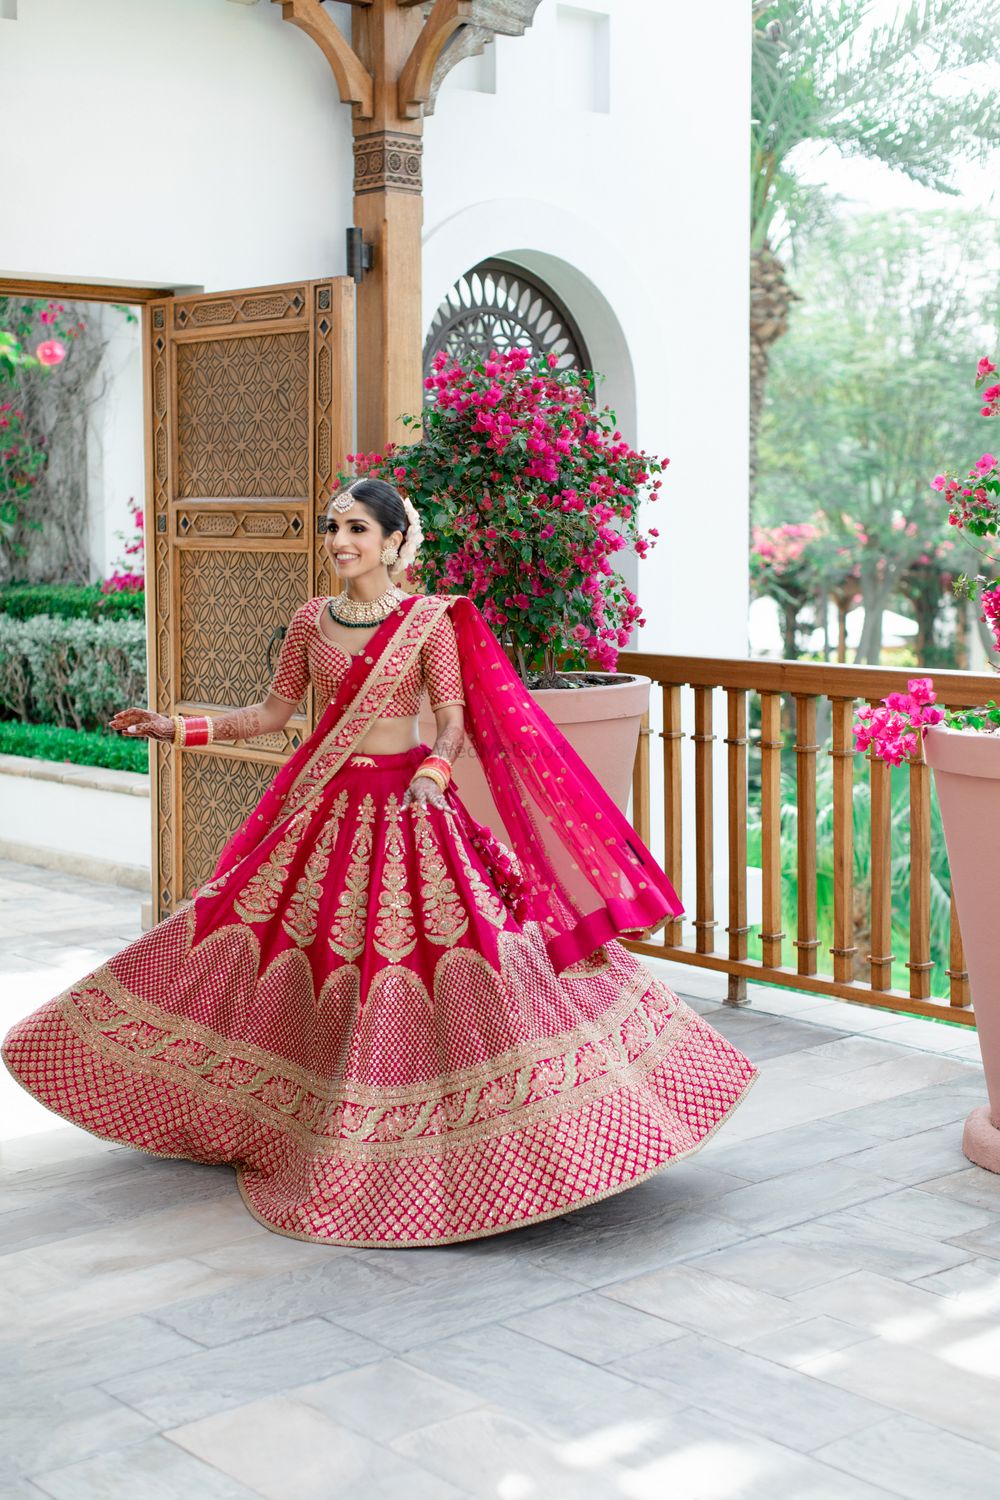 Photo of Bride twirling in her bright pink lehenga.